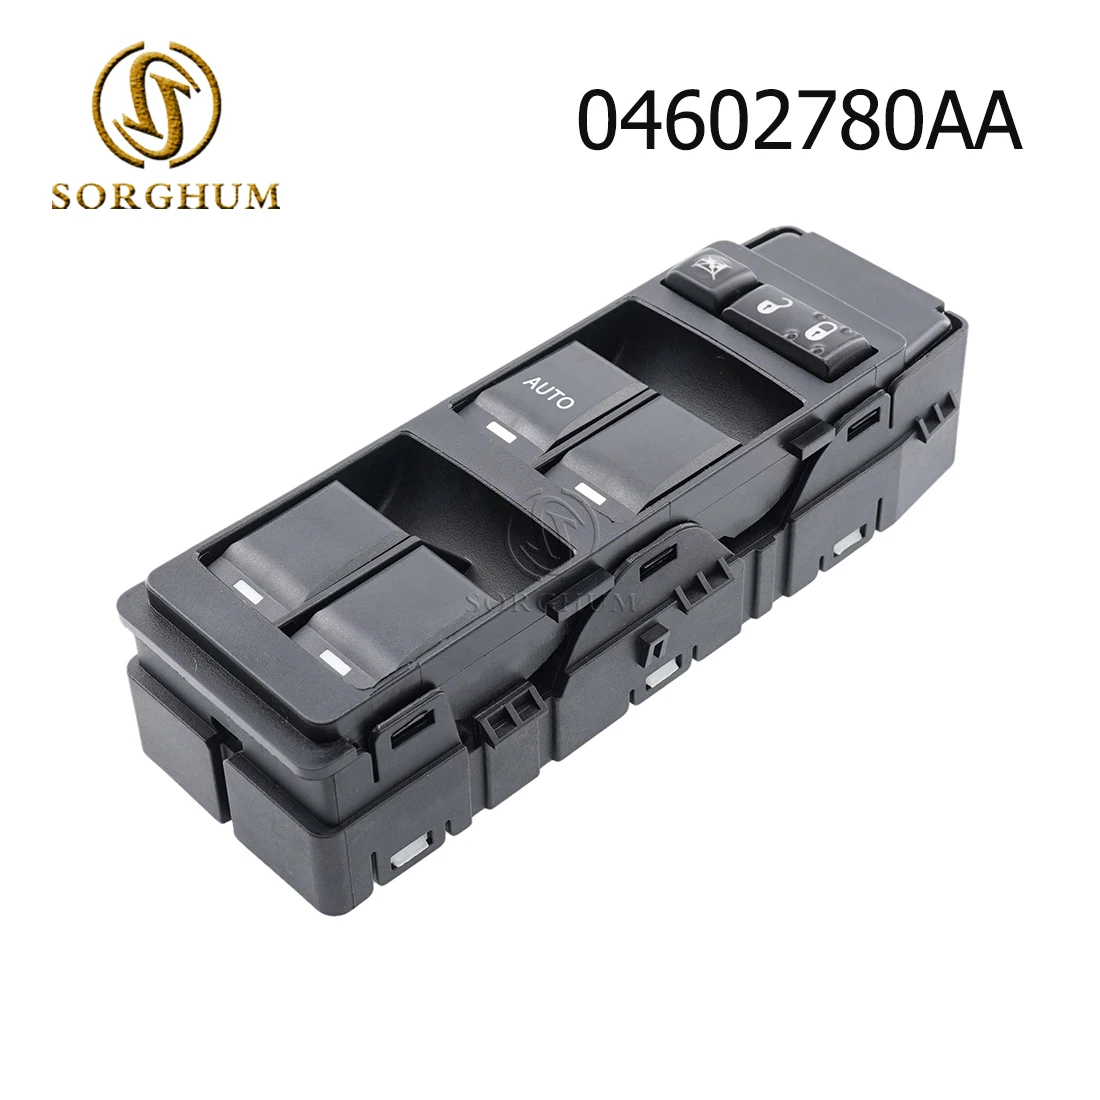 

SORGHUM Electric Window Master Control Switch Button For Dodge Avenger Charger Magnum Jeep Patriot Chrysler 4602780AA 04602780AA